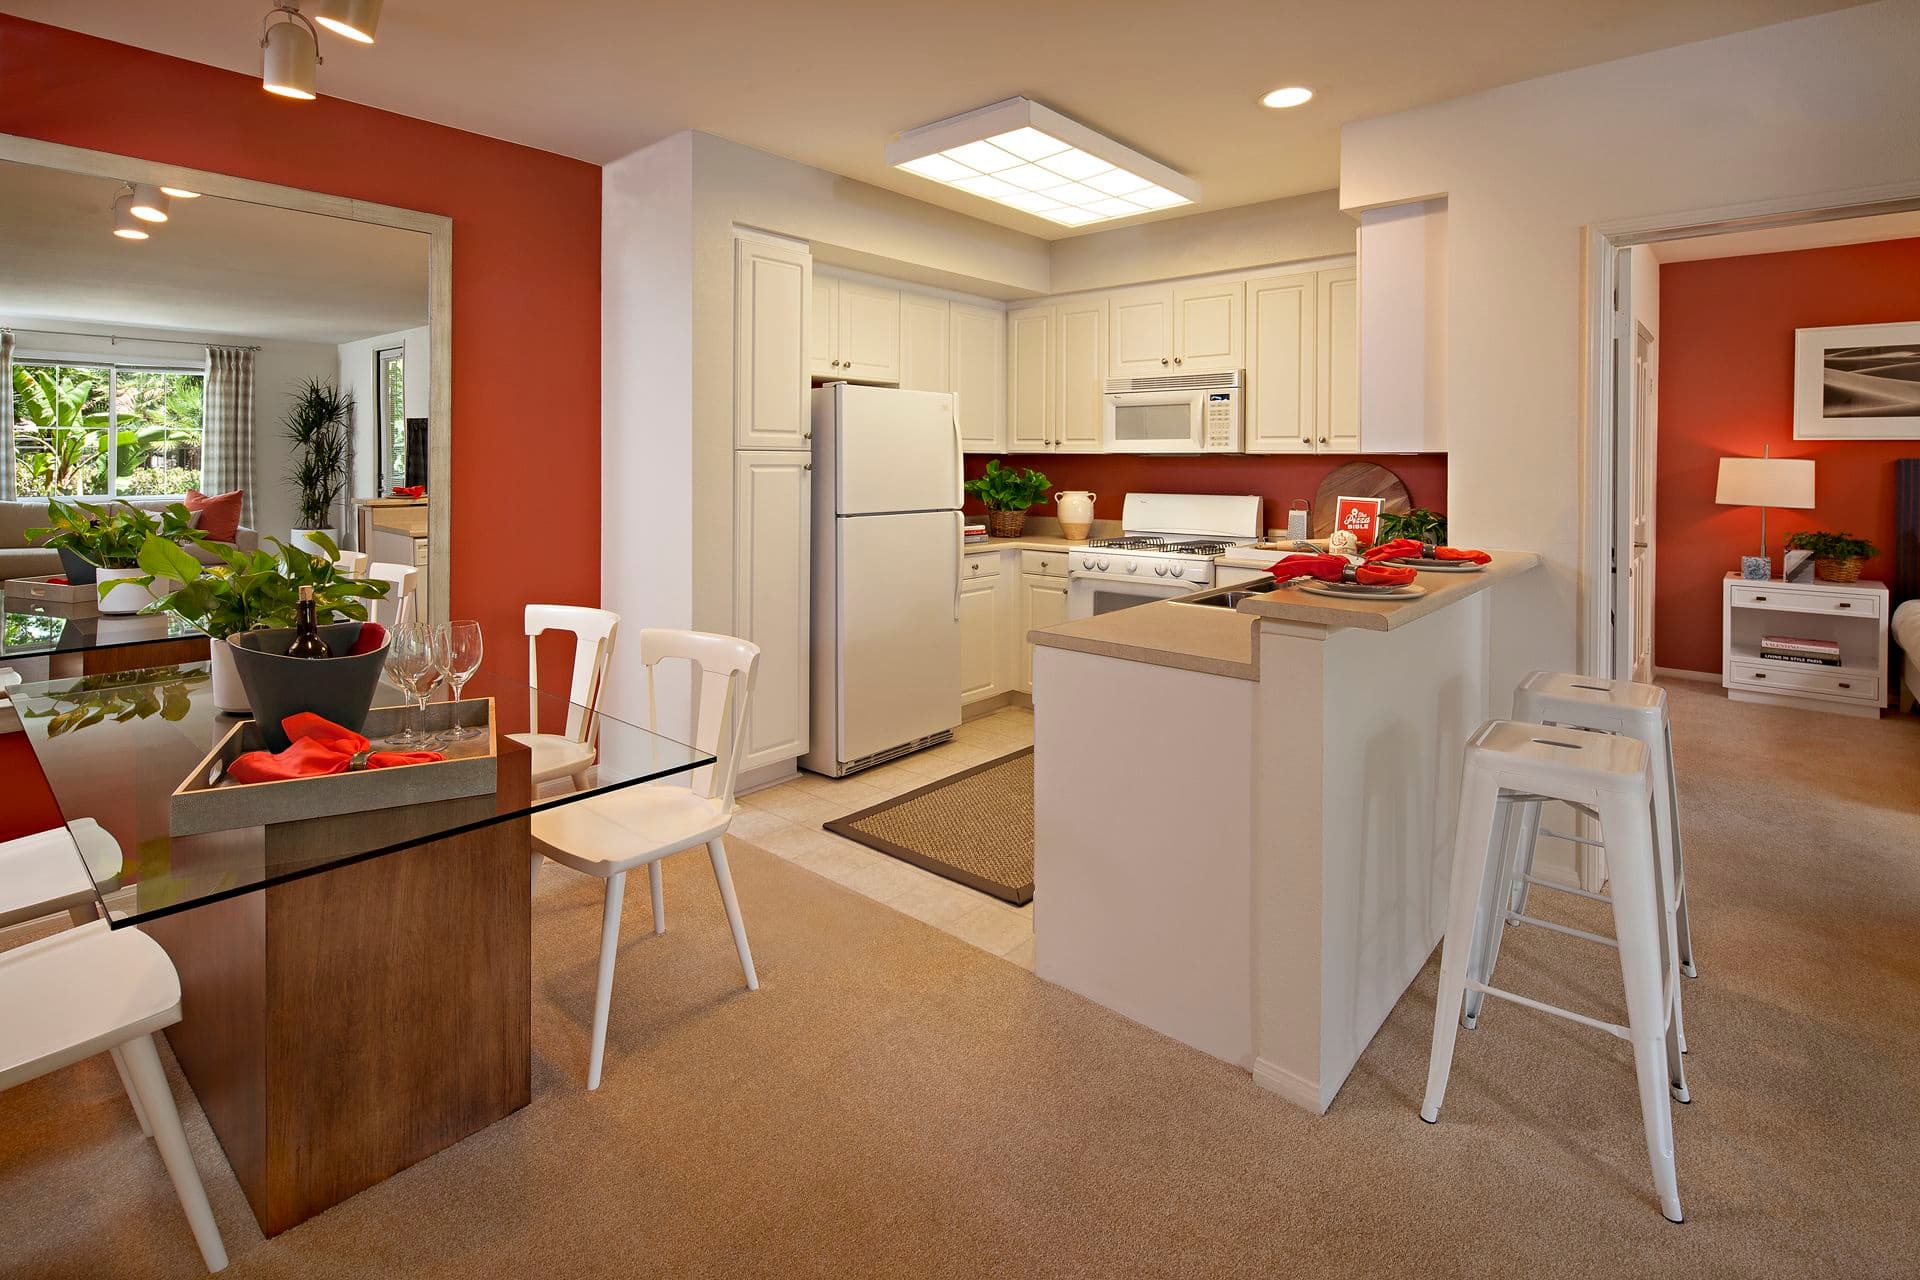 Interior view of kitchen and dining room at Serrano Apartment Homes in Irvine, CA.